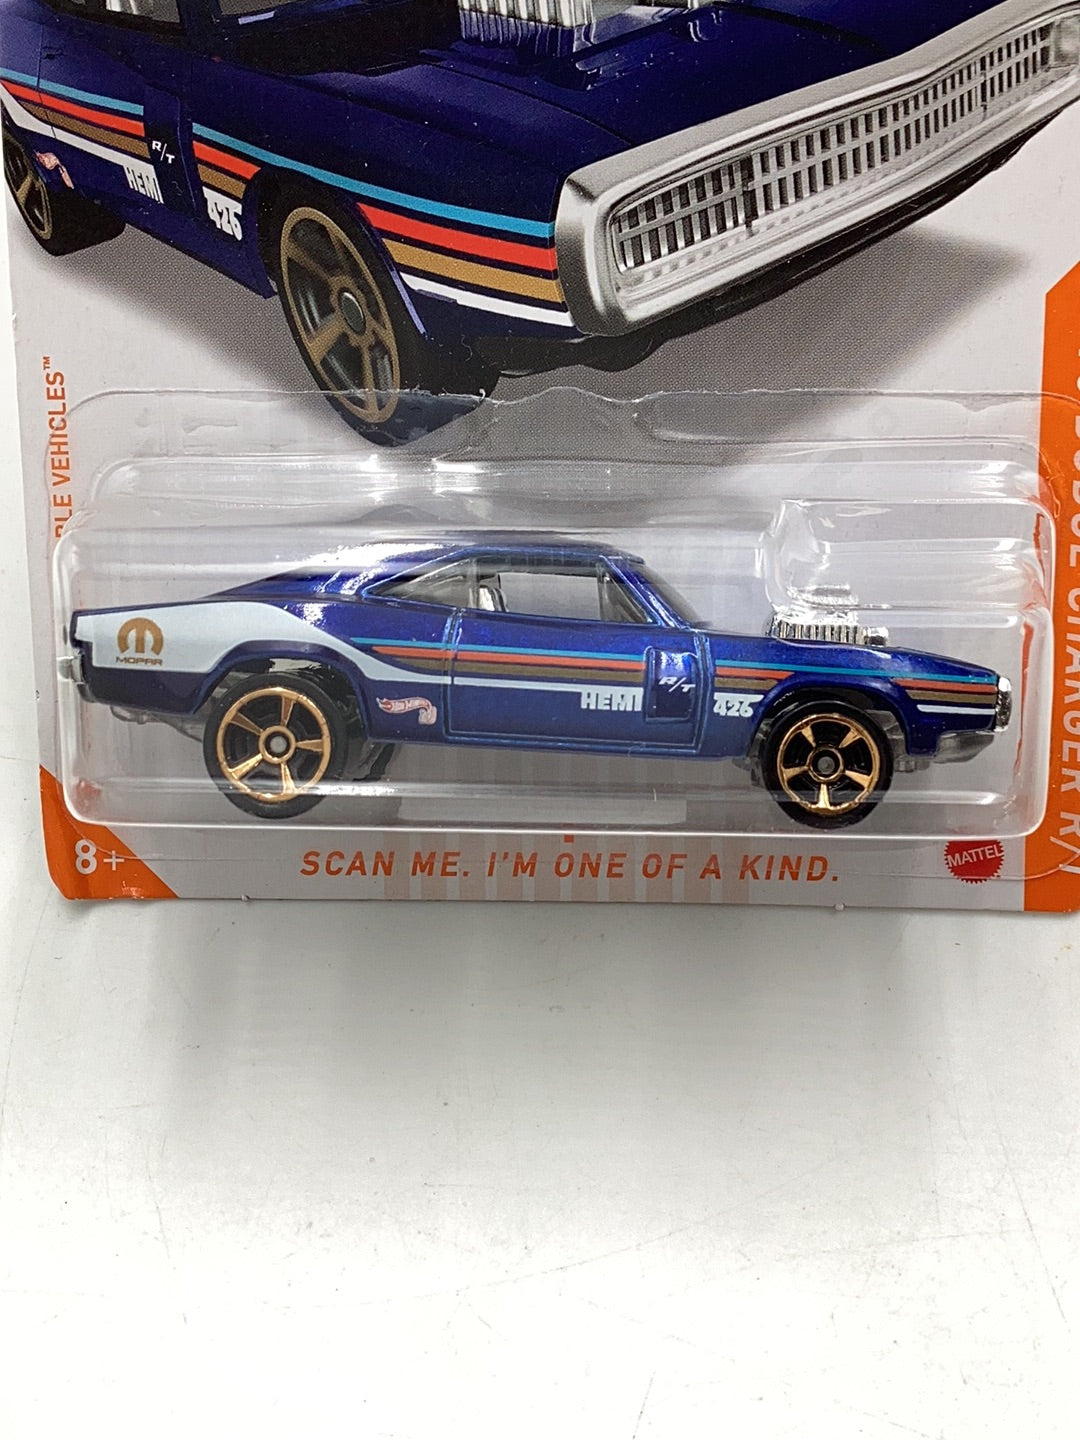 Hot Wheels ID #8 70 Dodge Charger R/T Factory Sealed sticker with protector 160i